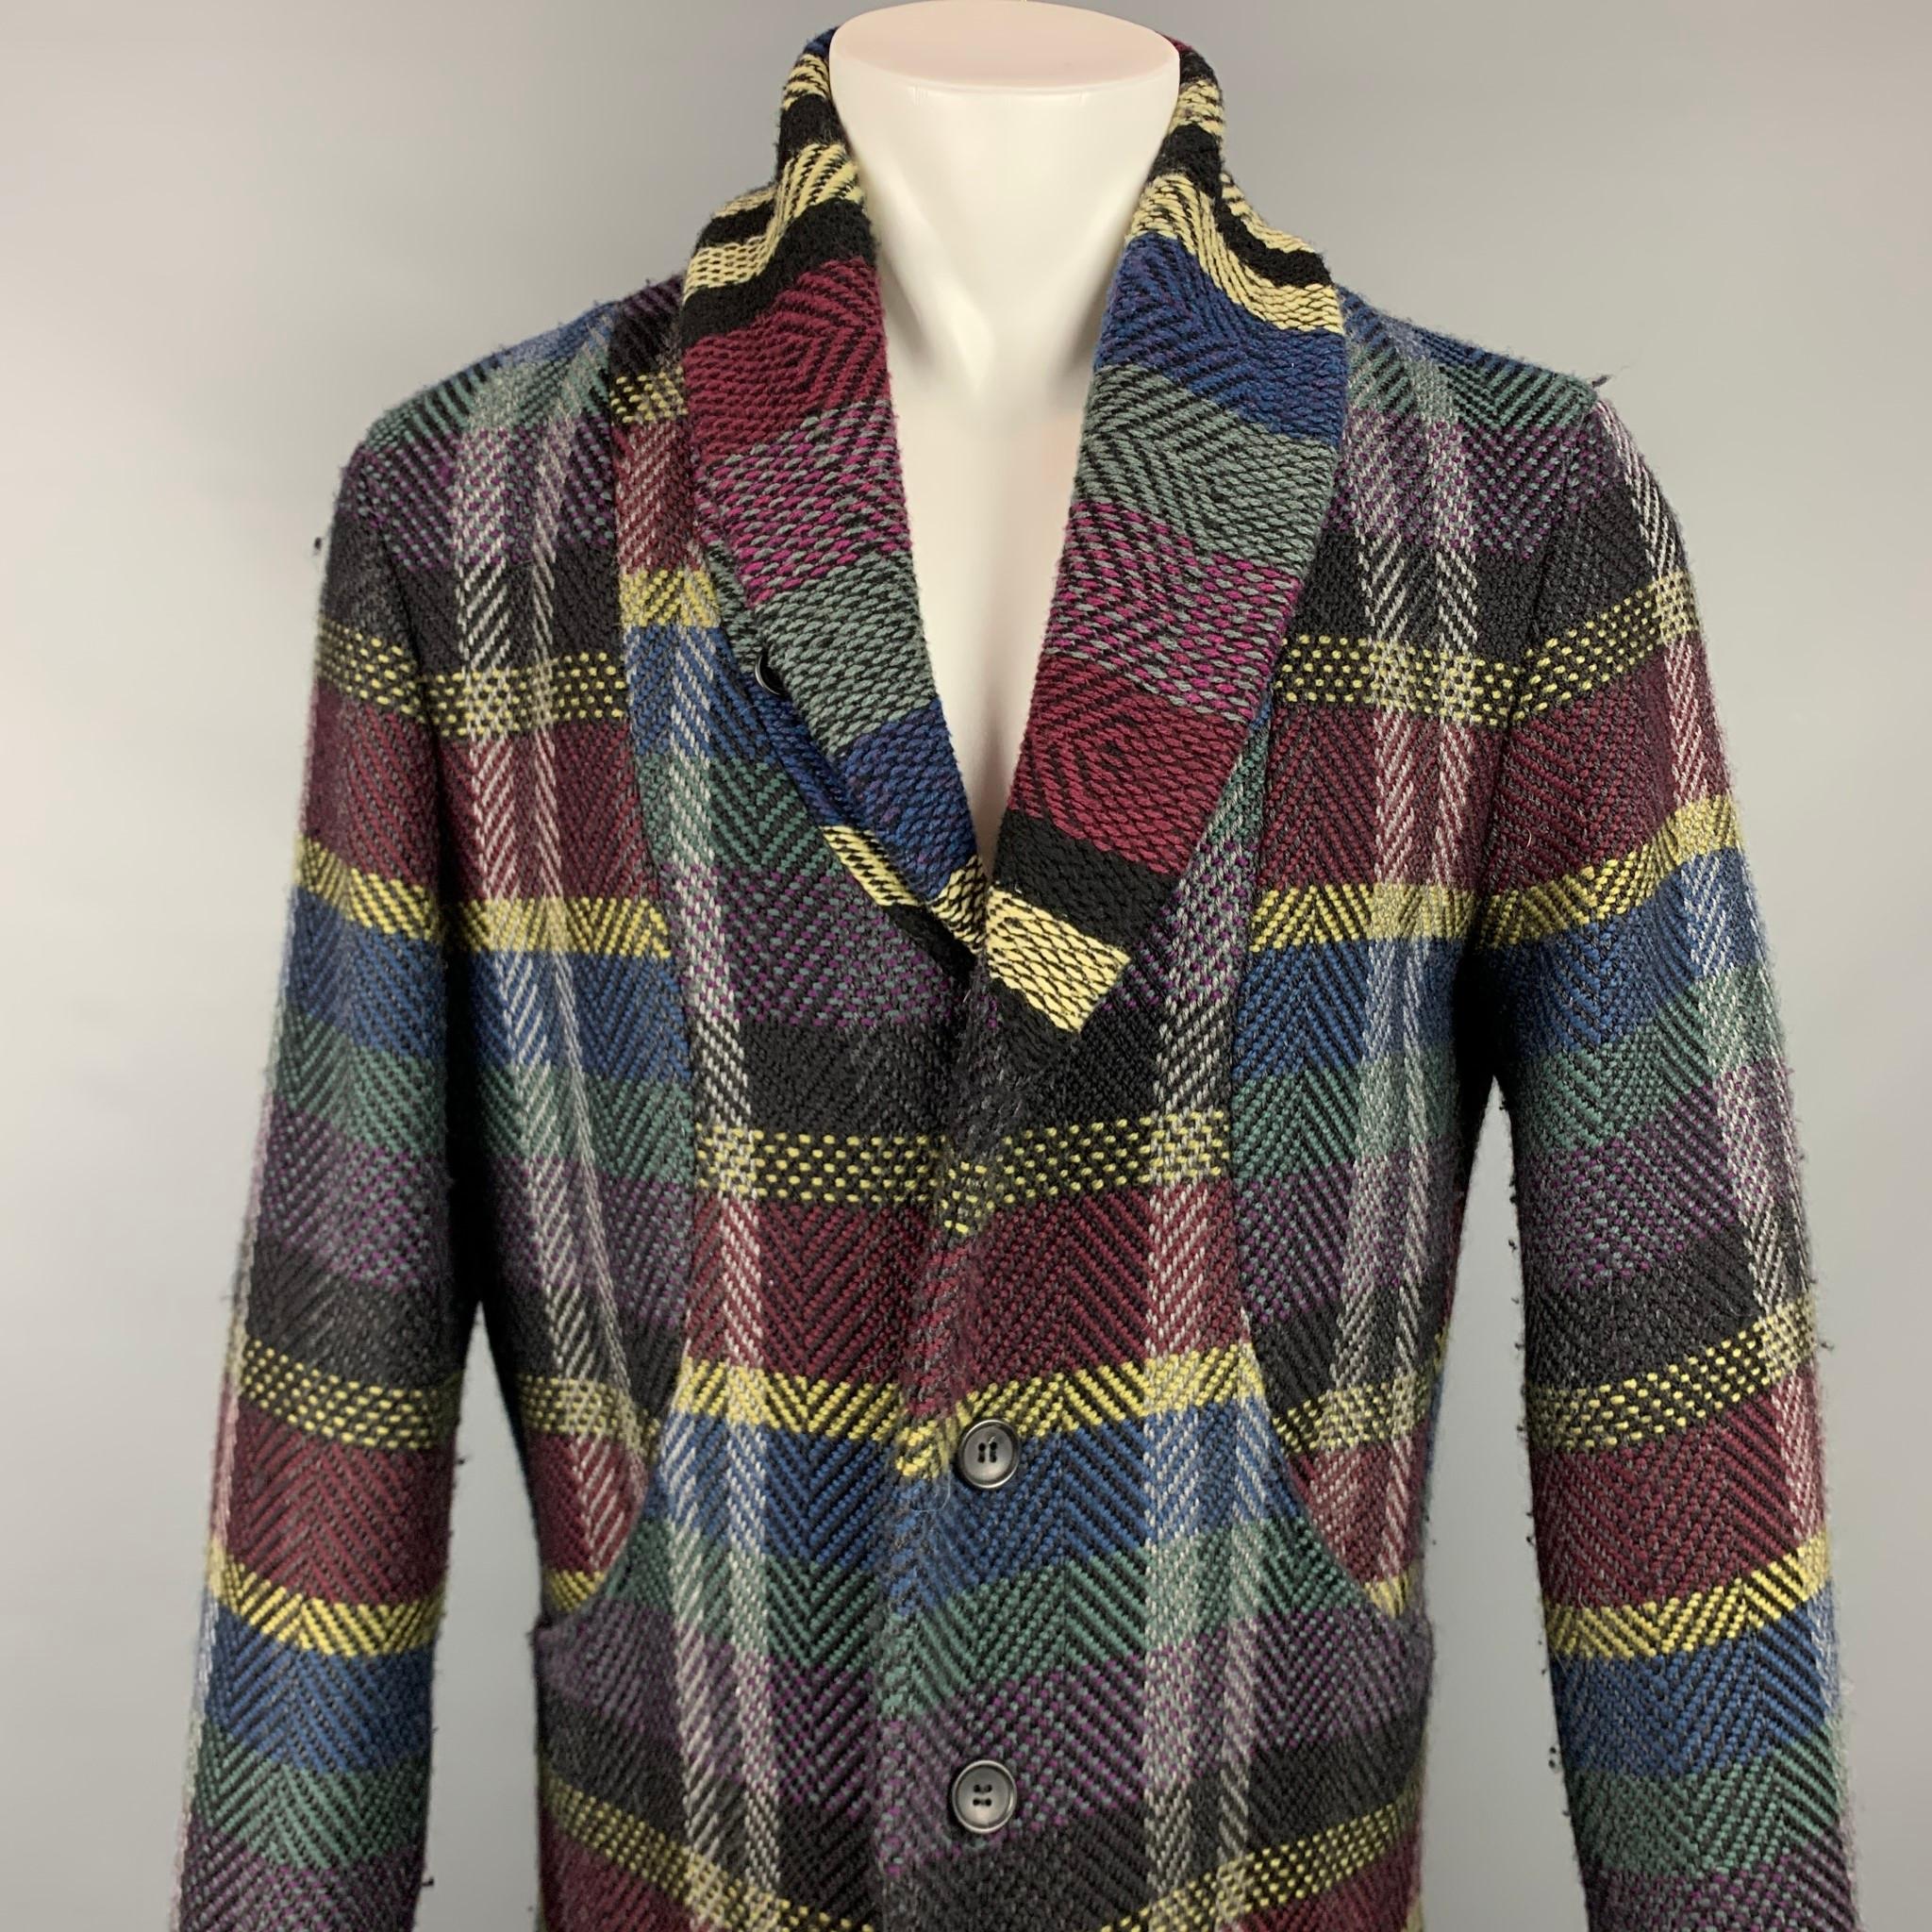 ISSEY MIYAKE coat comes in a multi-color plaid material with a full liner featuring a shawl collar, two large pockets, and a buttoned closure.  Retail $2000

Very Good Pre-Owned Condition.
Marked: 2

Measurements:

Shoulder: 19 in.
Chest: 44